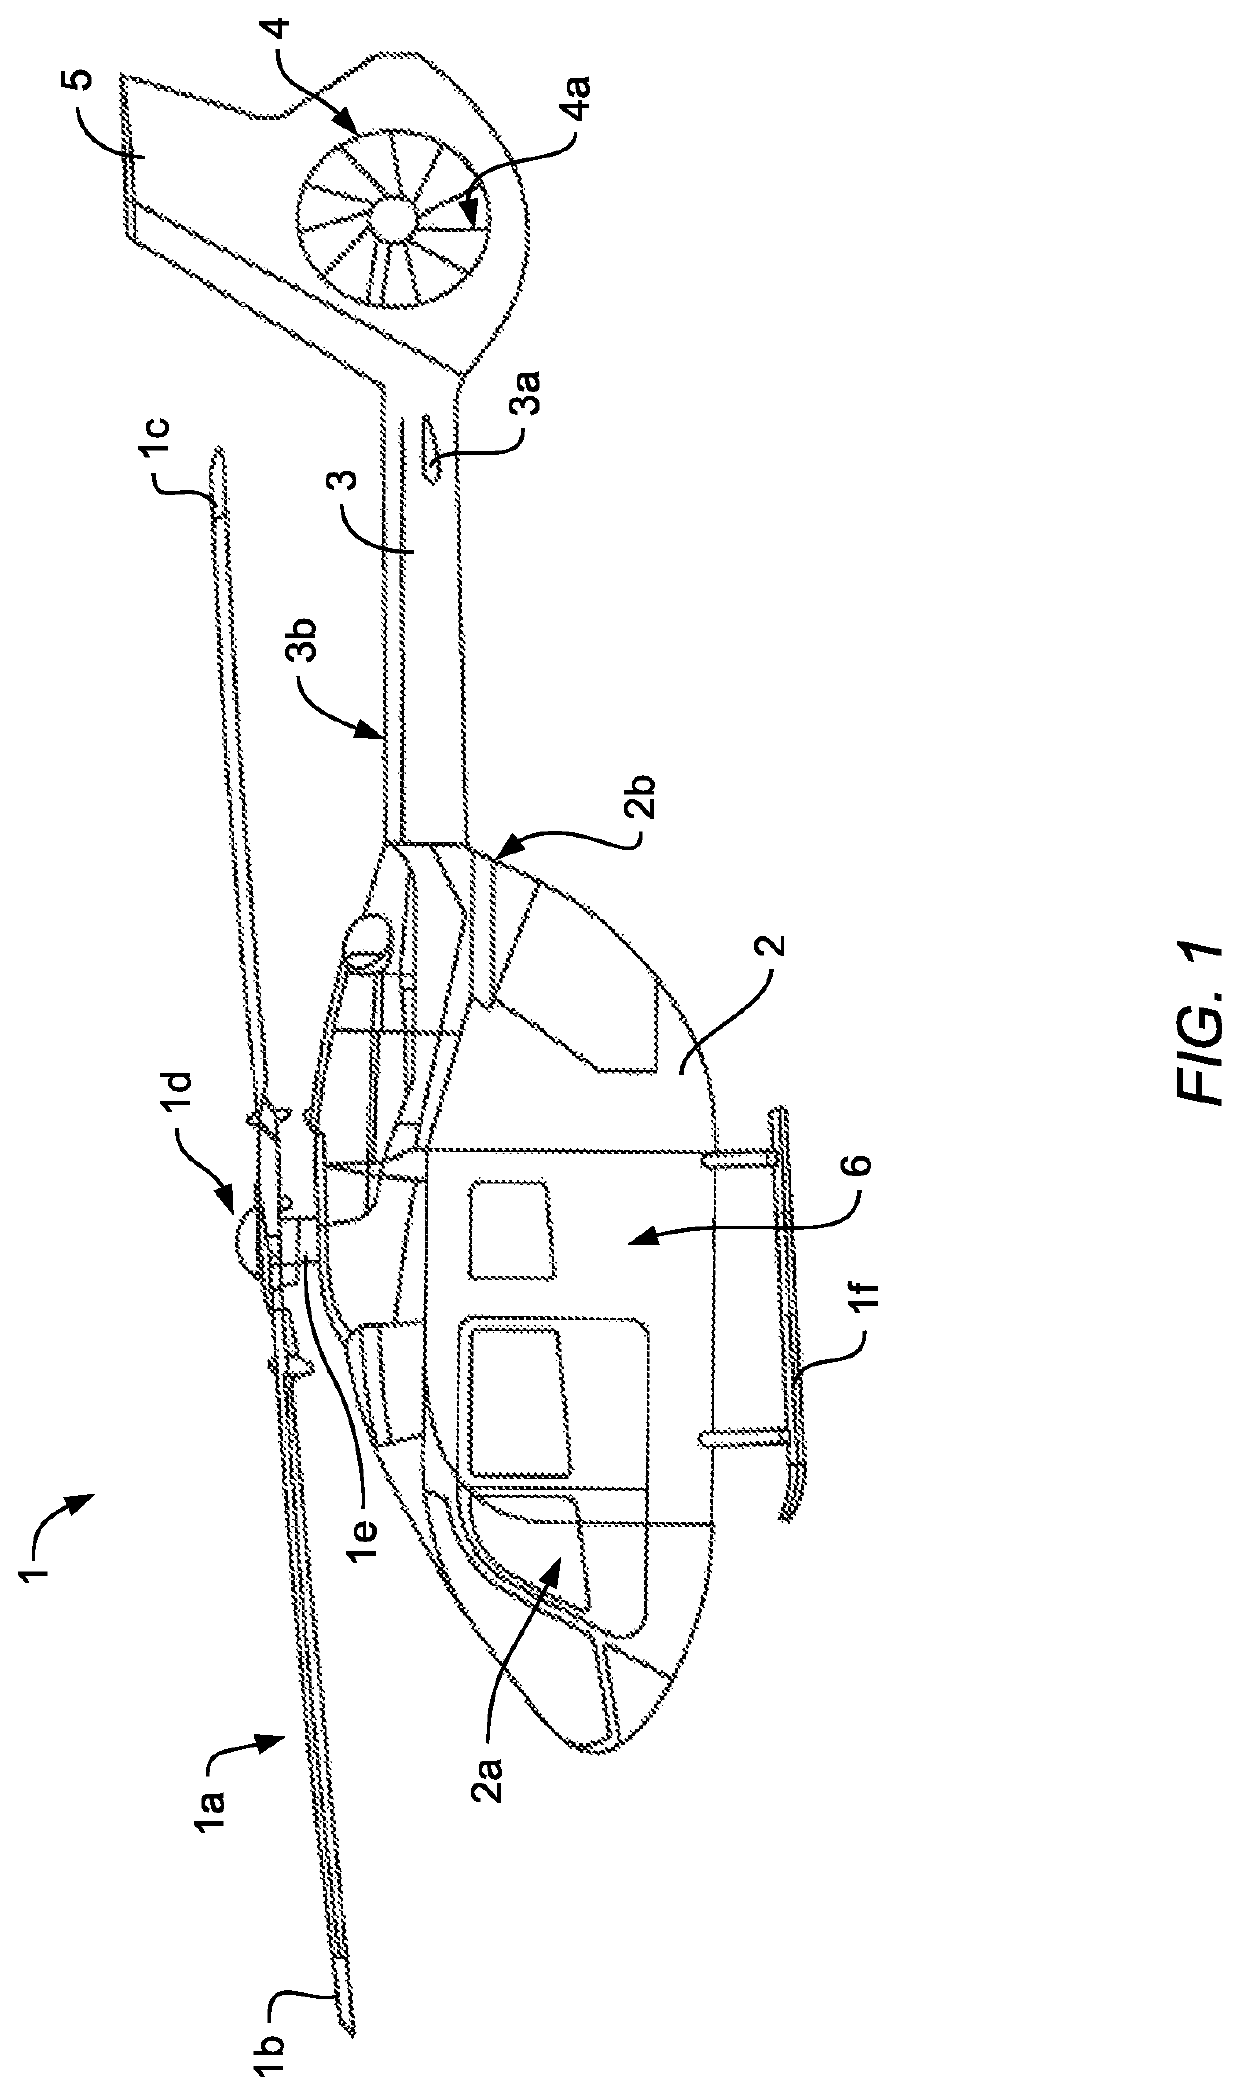 Rotary wing aircraft with a structural arrangement that comprises an electrically conductive connection